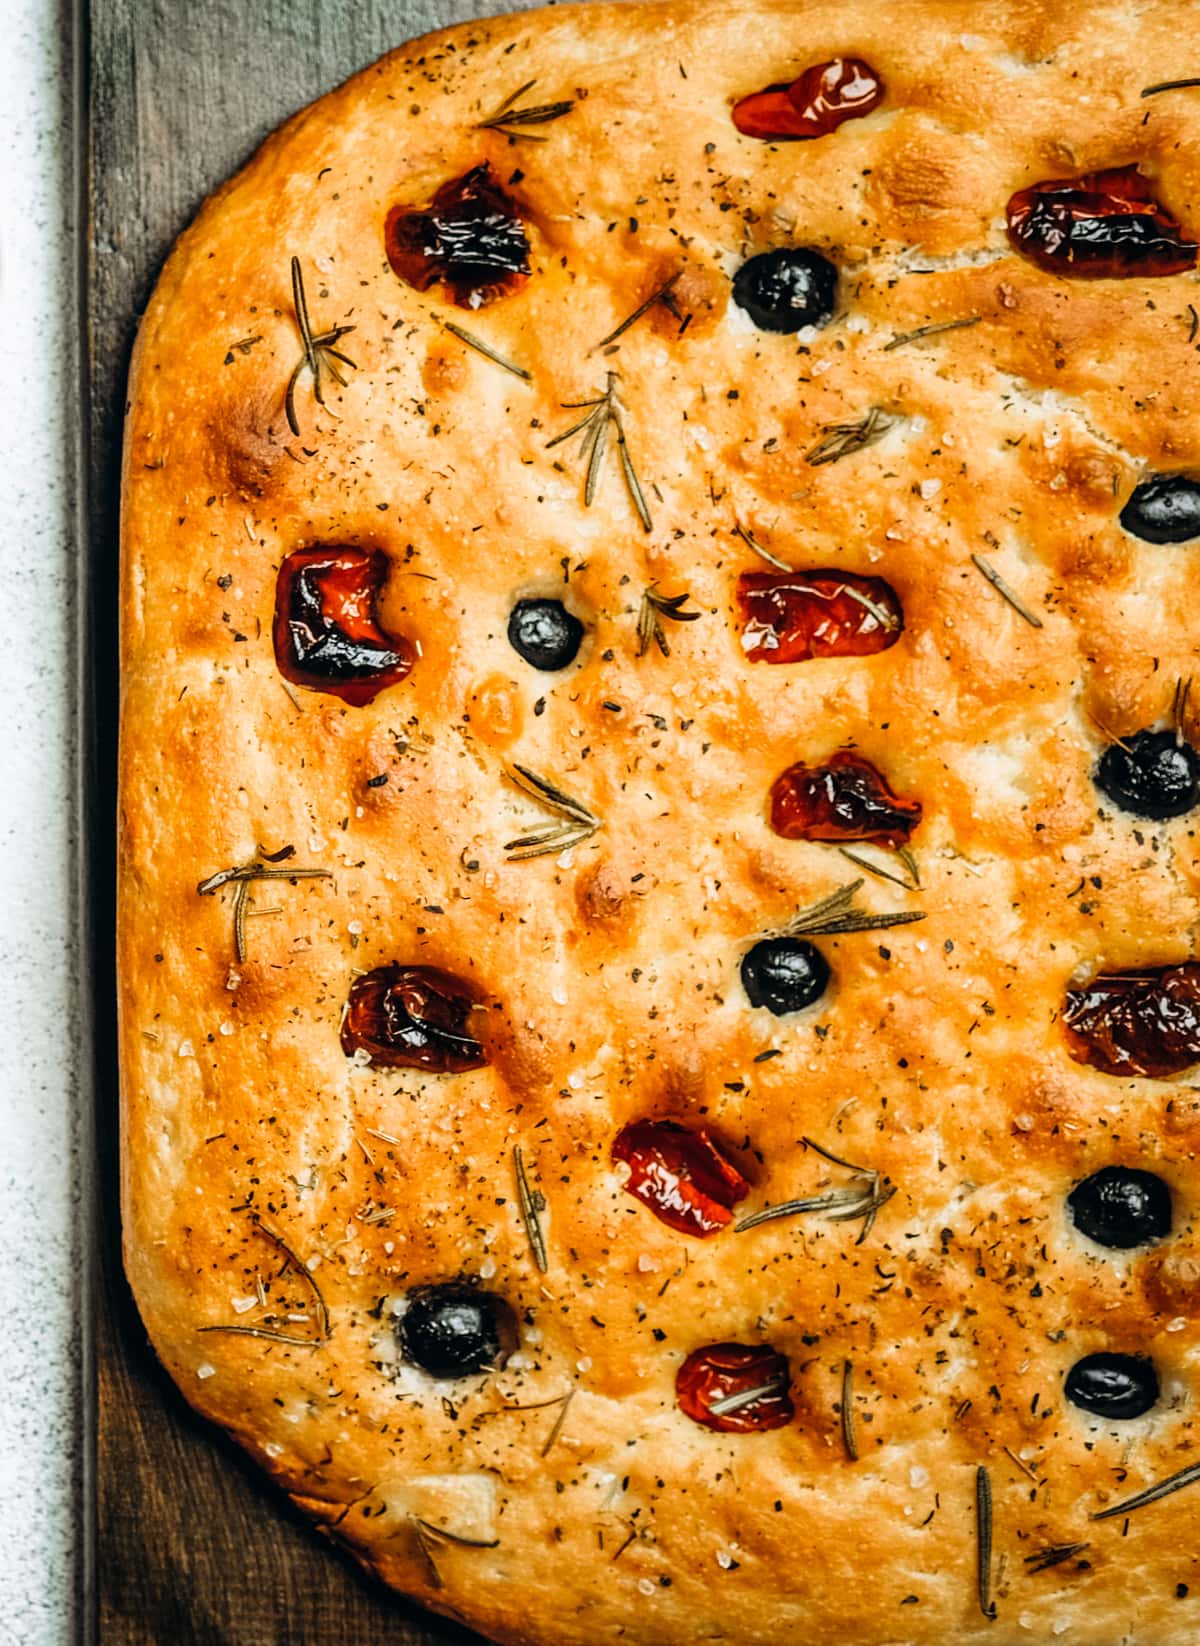 Traditional Italian Focaccia bread topped with tomatoes, olives, and rosemary.